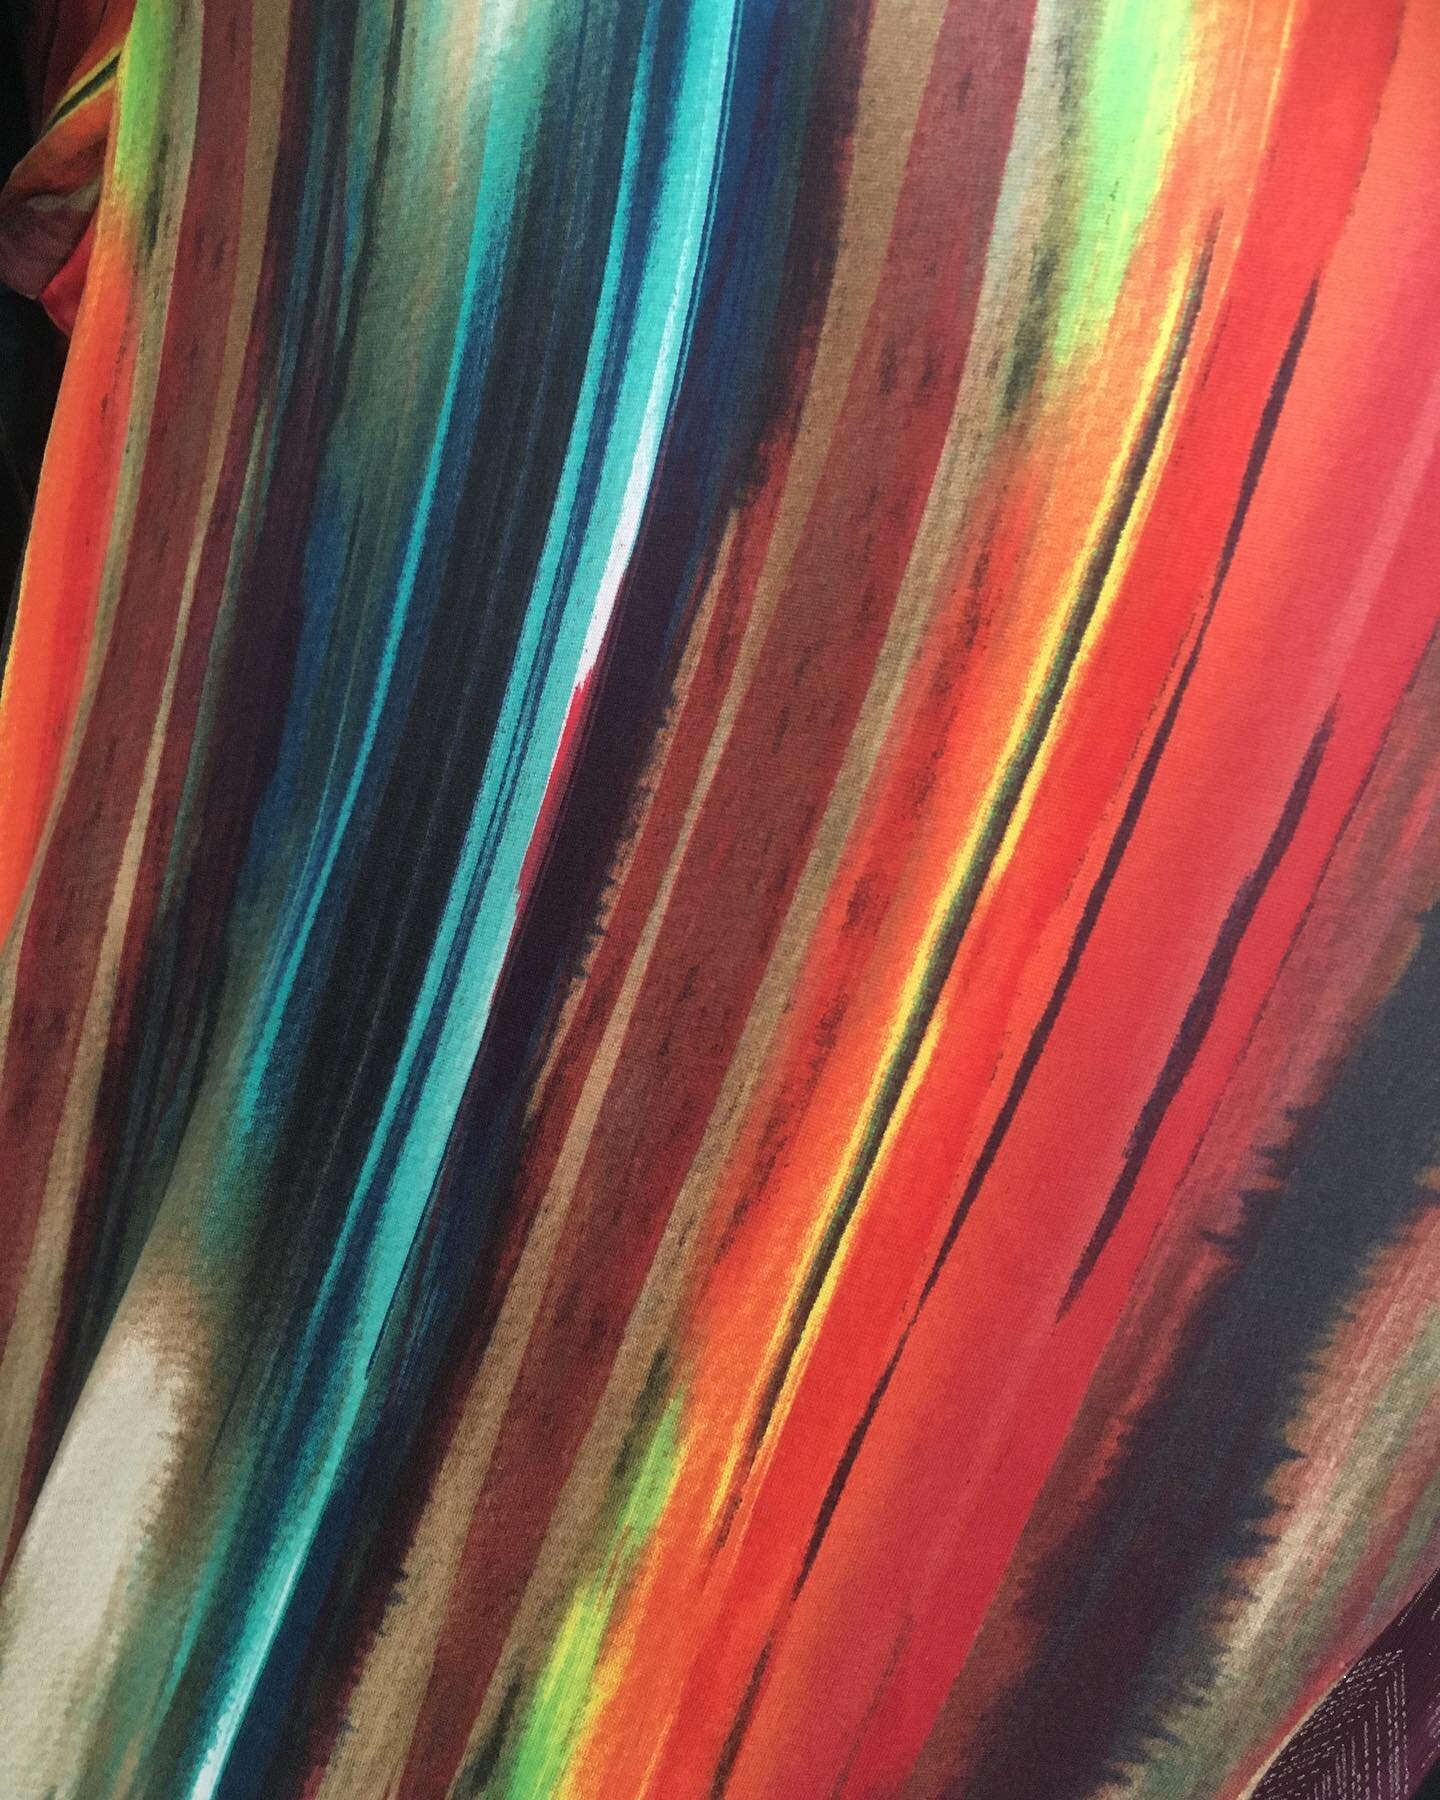 New Top Coming soon!!! These colors are so vibrant! #westernwear #westernshowclothes